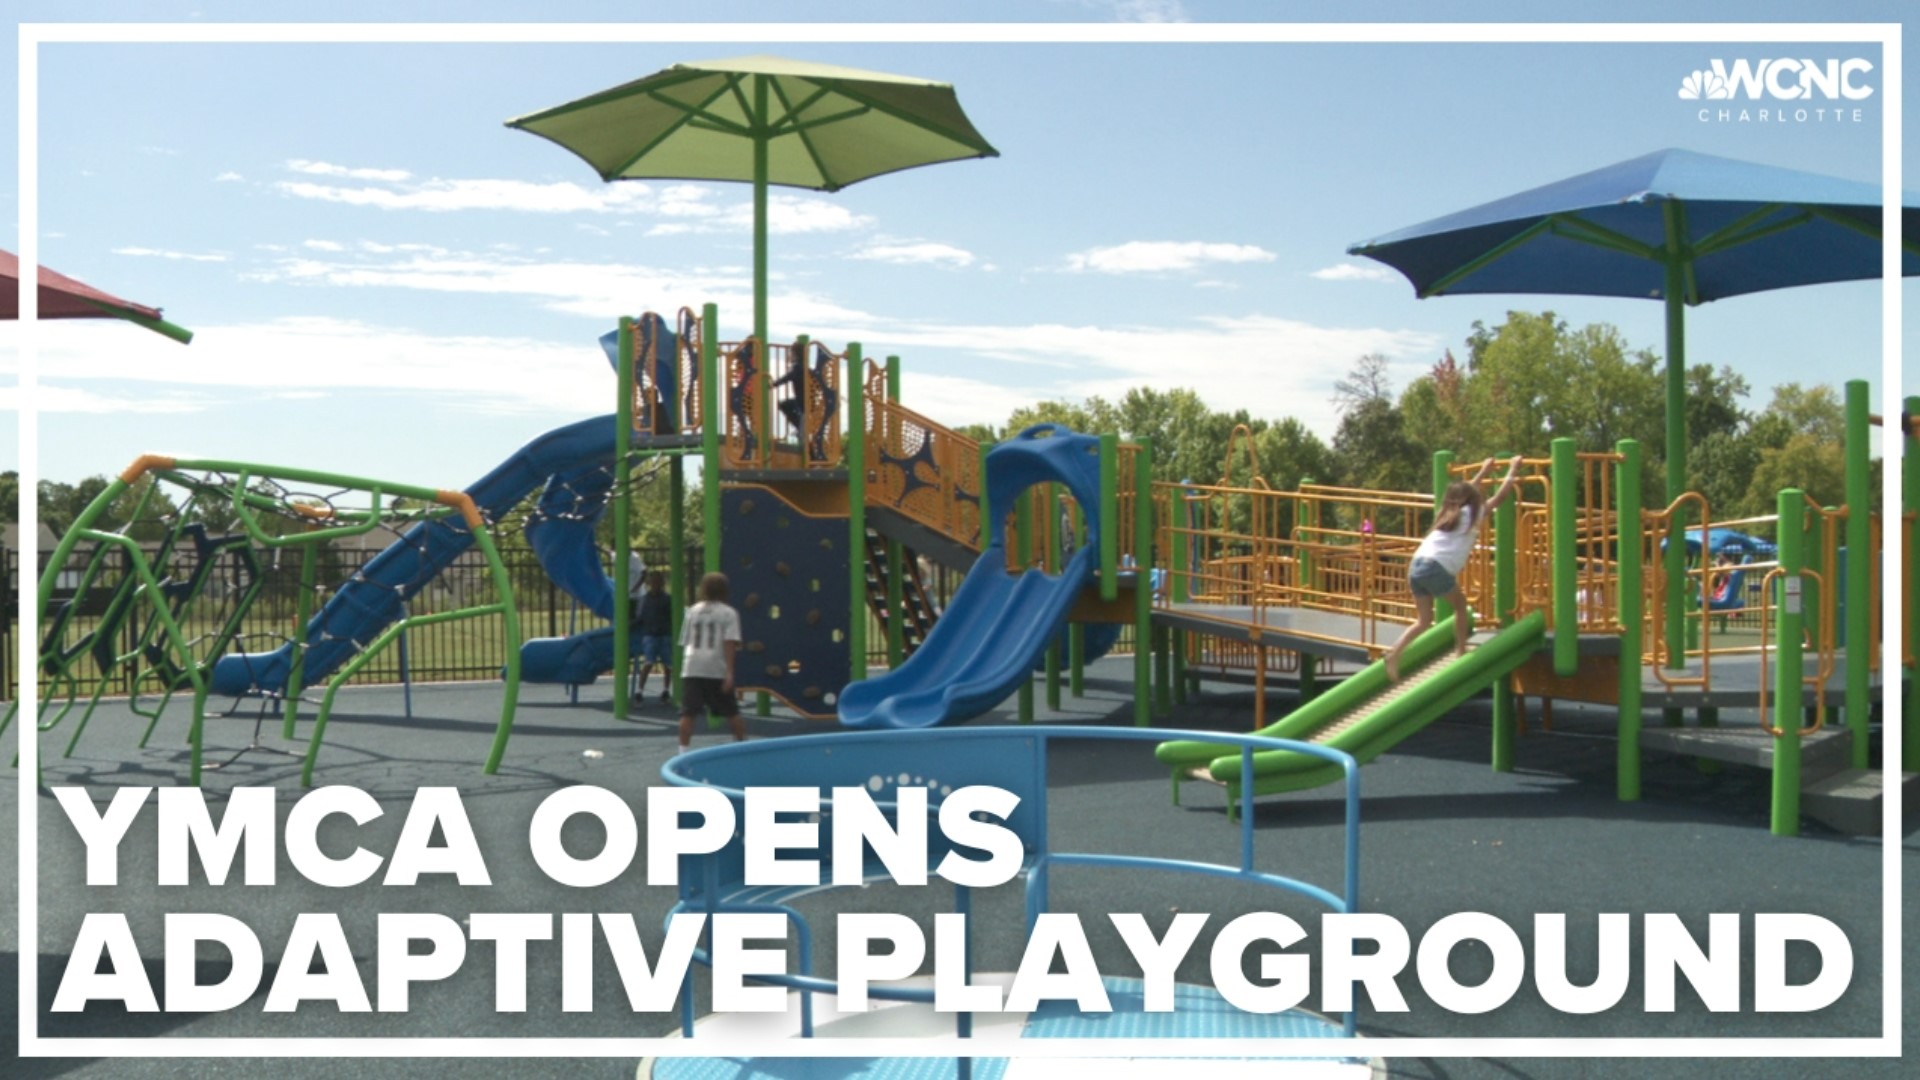 The playground includes sensory play pieces, wide ramps for wheelchair access and diverse spaces for children of all abilities to enjoy.